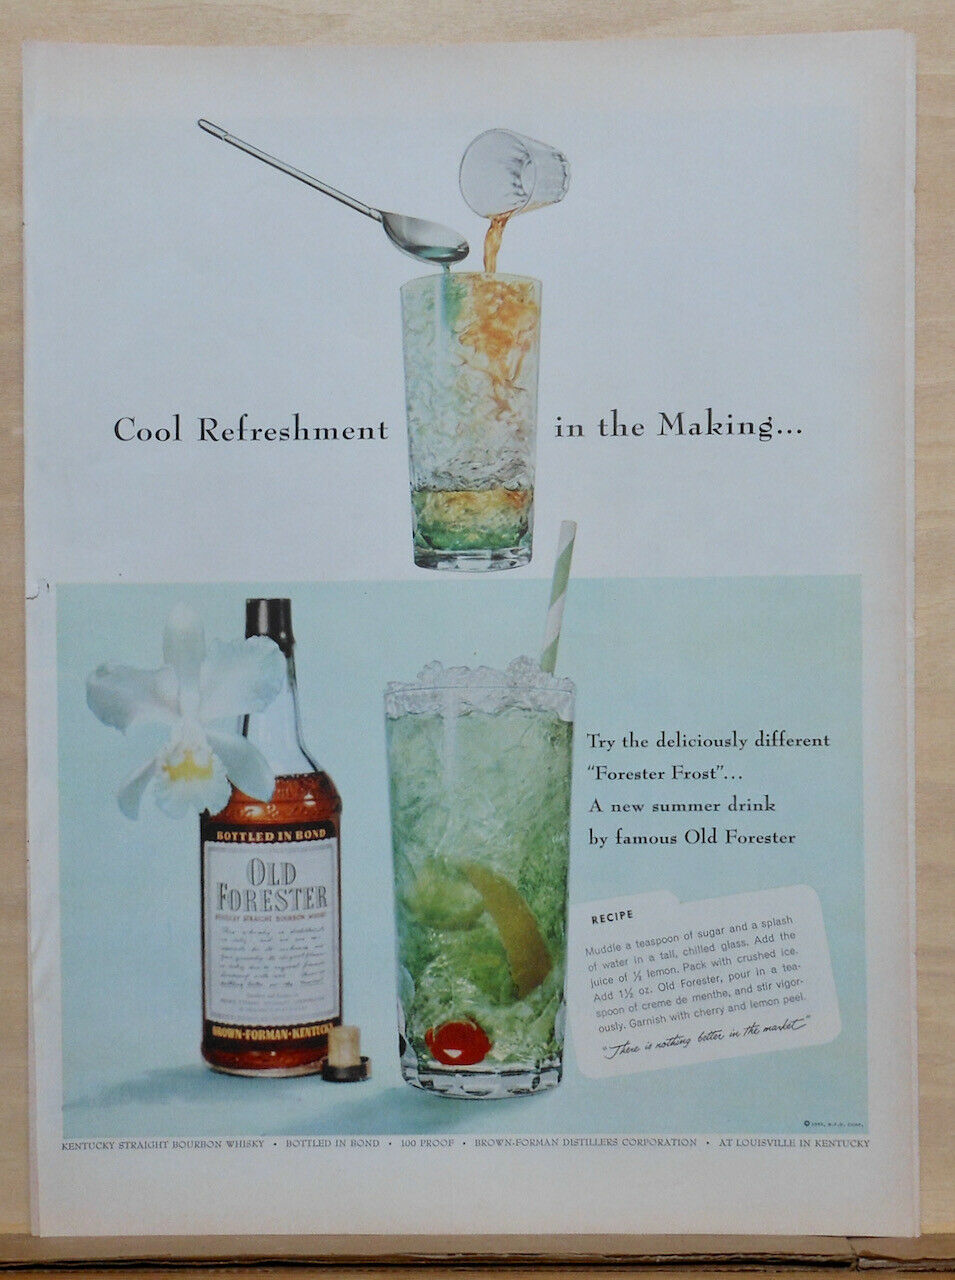 1955 Magazine Ad For Old Forester Bourbon - Forester Frost Cocktail For Summer